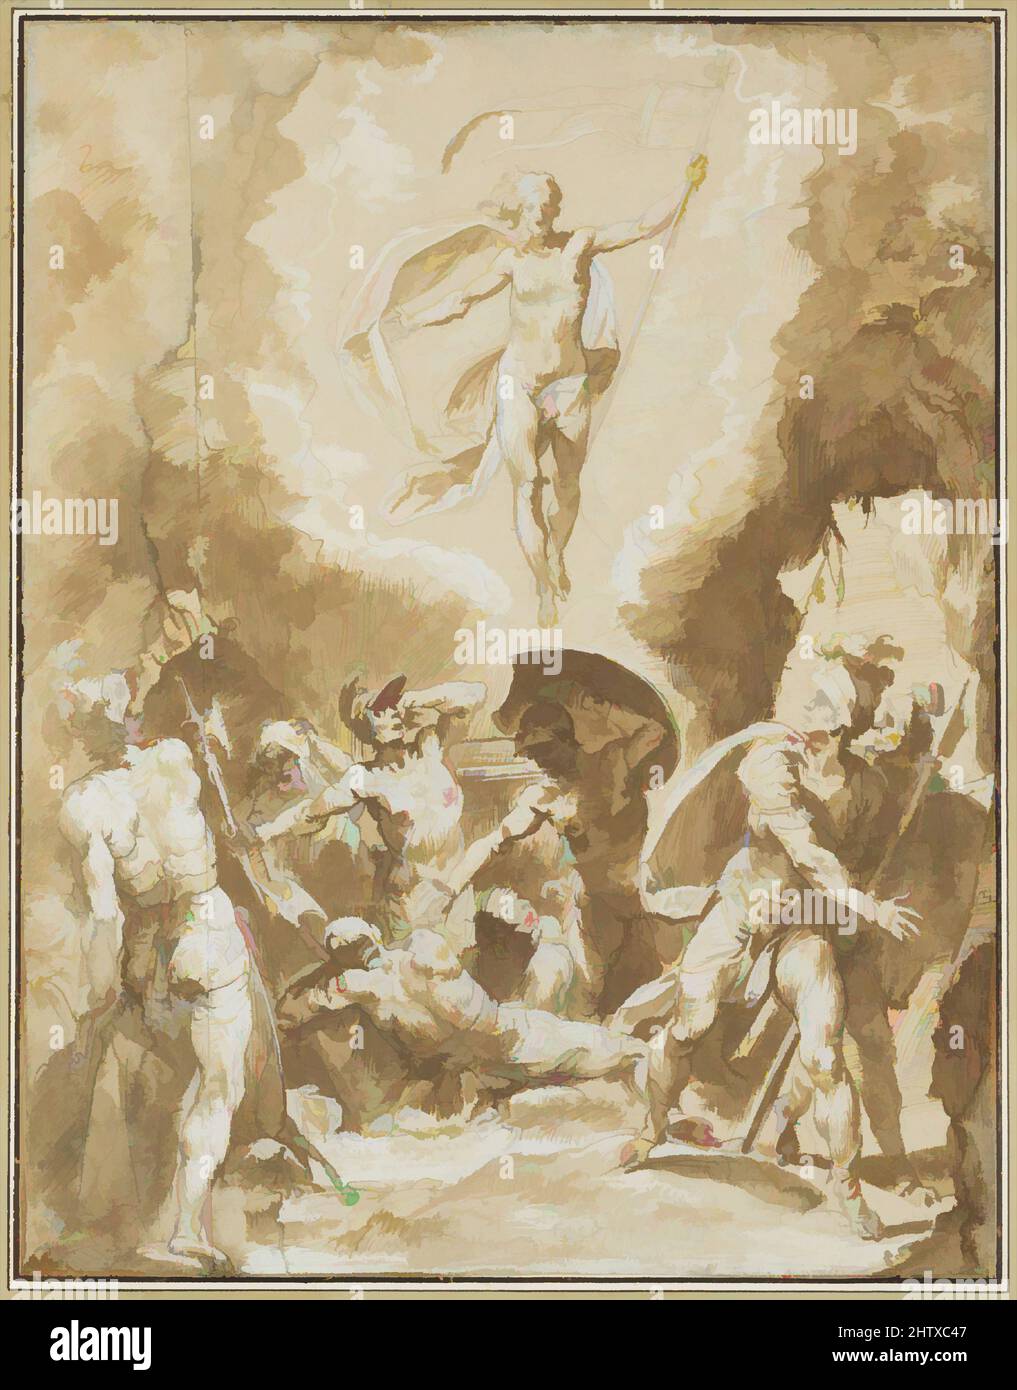 Art inspired by The Resurrection, ca. 1600, Pen and brown ink, brush and brown wash, highlighted with white, over black chalk, 16 5/8 x 12 3/4in. (42.2 x 32.4cm), Drawings, Cavaliere d'Arpino (Giuseppe Cesari) (Italian, Arpino 1568–1640 Rome, Classic works modernized by Artotop with a splash of modernity. Shapes, color and value, eye-catching visual impact on art. Emotions through freedom of artworks in a contemporary way. A timeless message pursuing a wildly creative new direction. Artists turning to the digital medium and creating the Artotop NFT Stock Photo